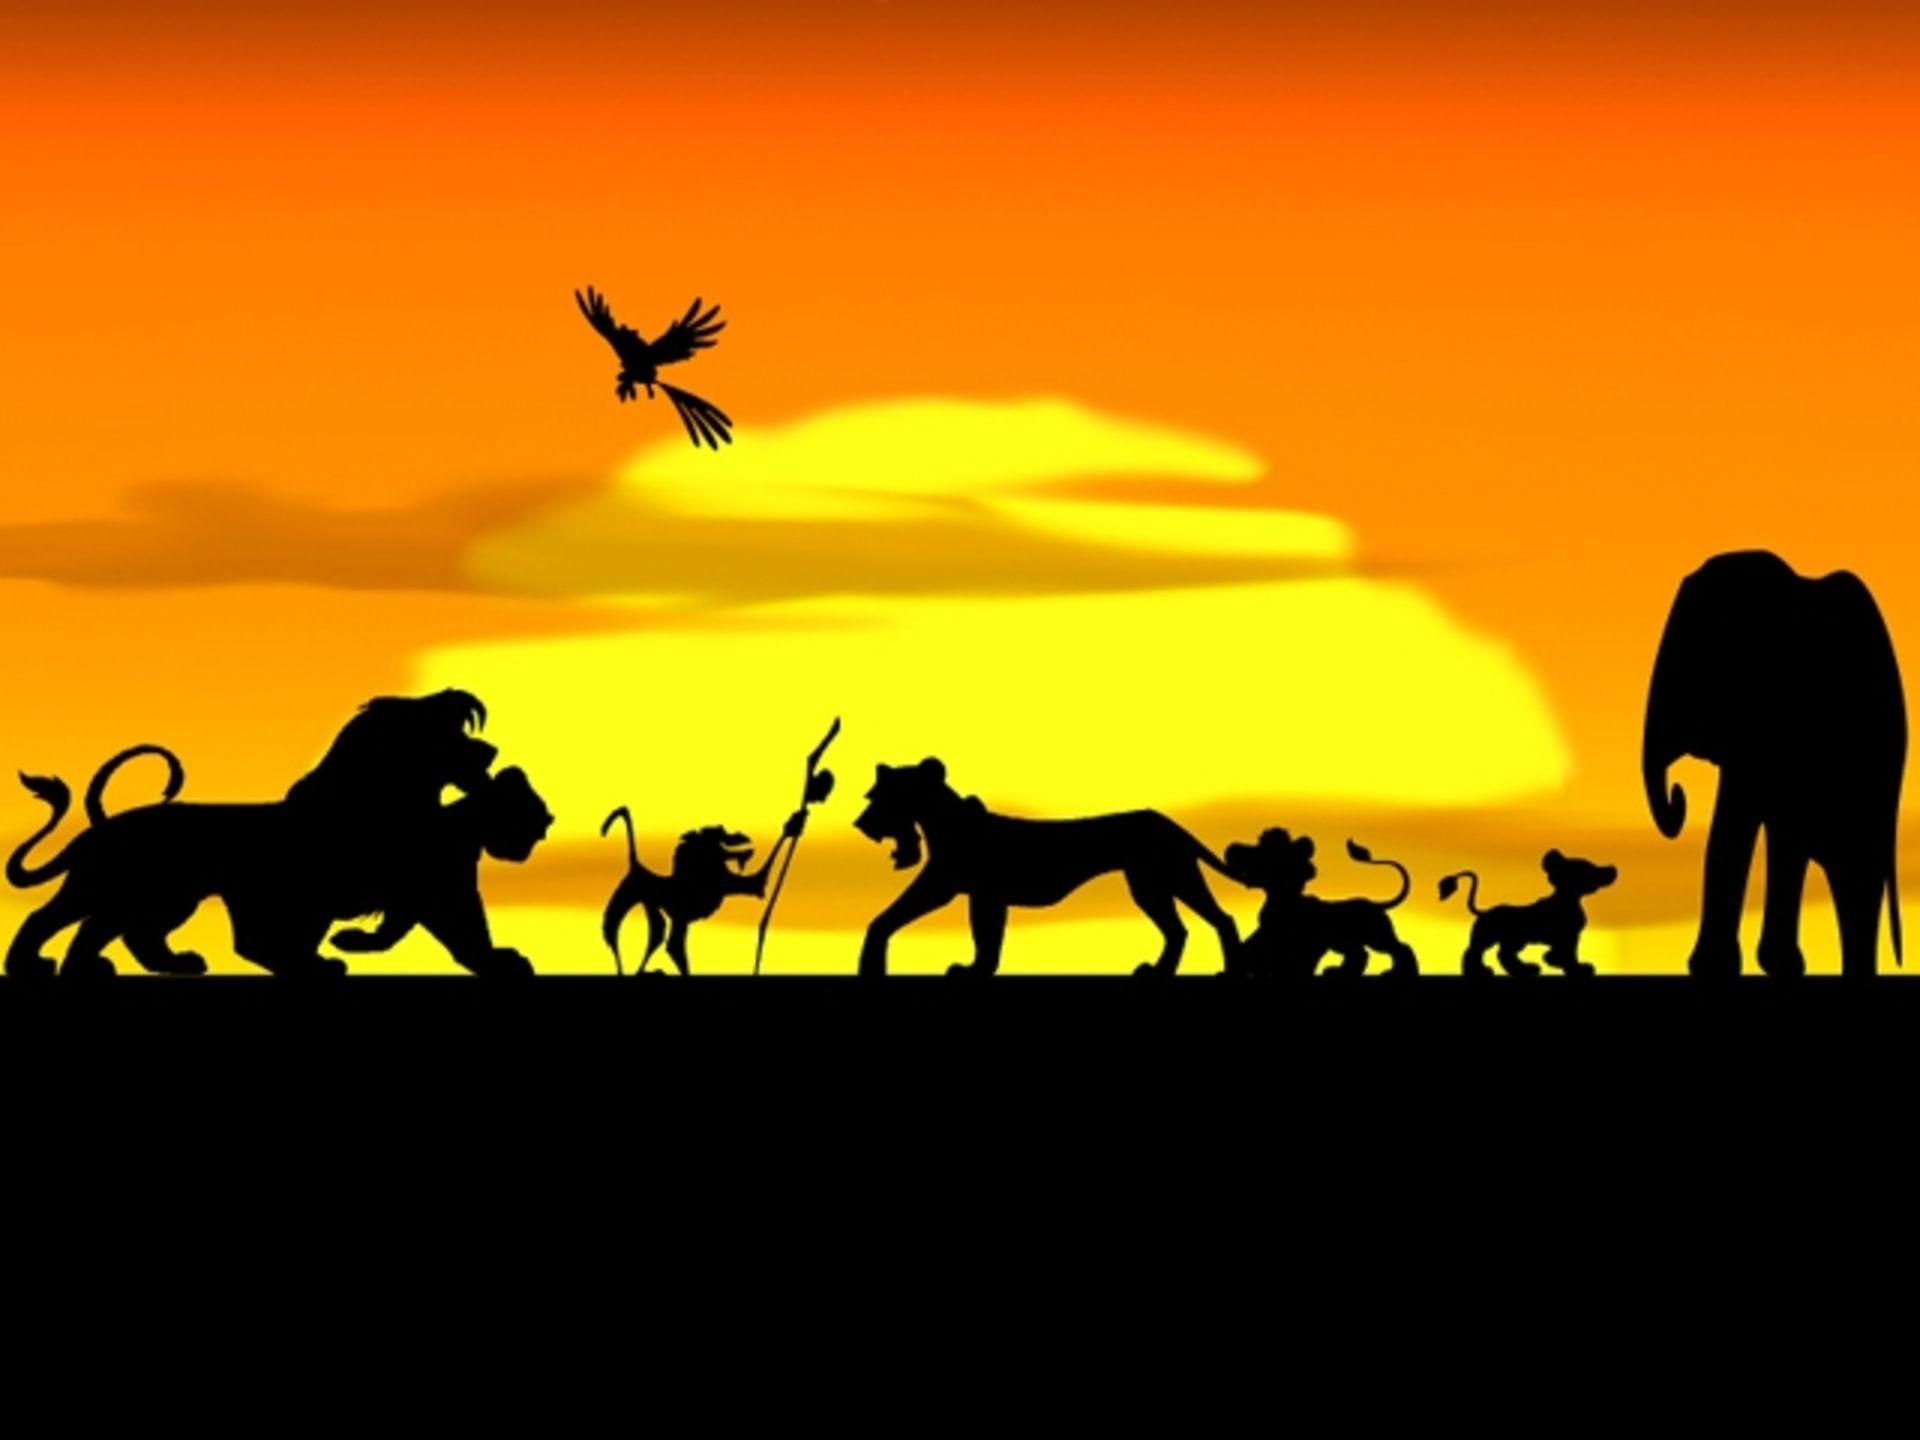 The Lion King Wallpaper, Picture, Image